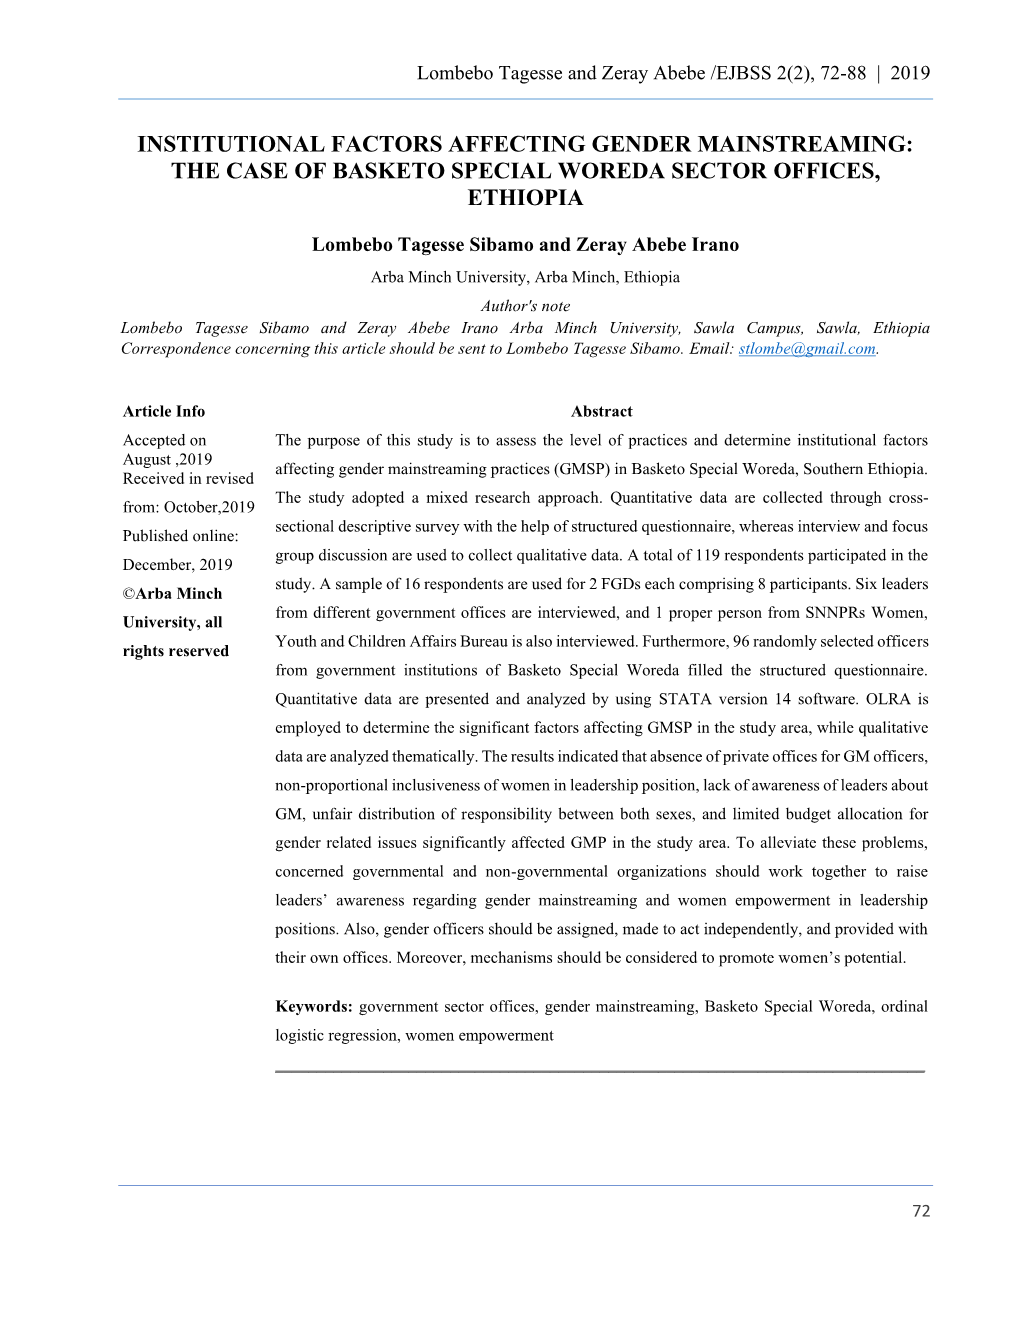 Institutional Factors Affecting Gender Mainstreaming: the Case of Basketo Special Woreda Sector Offices, Ethiopia